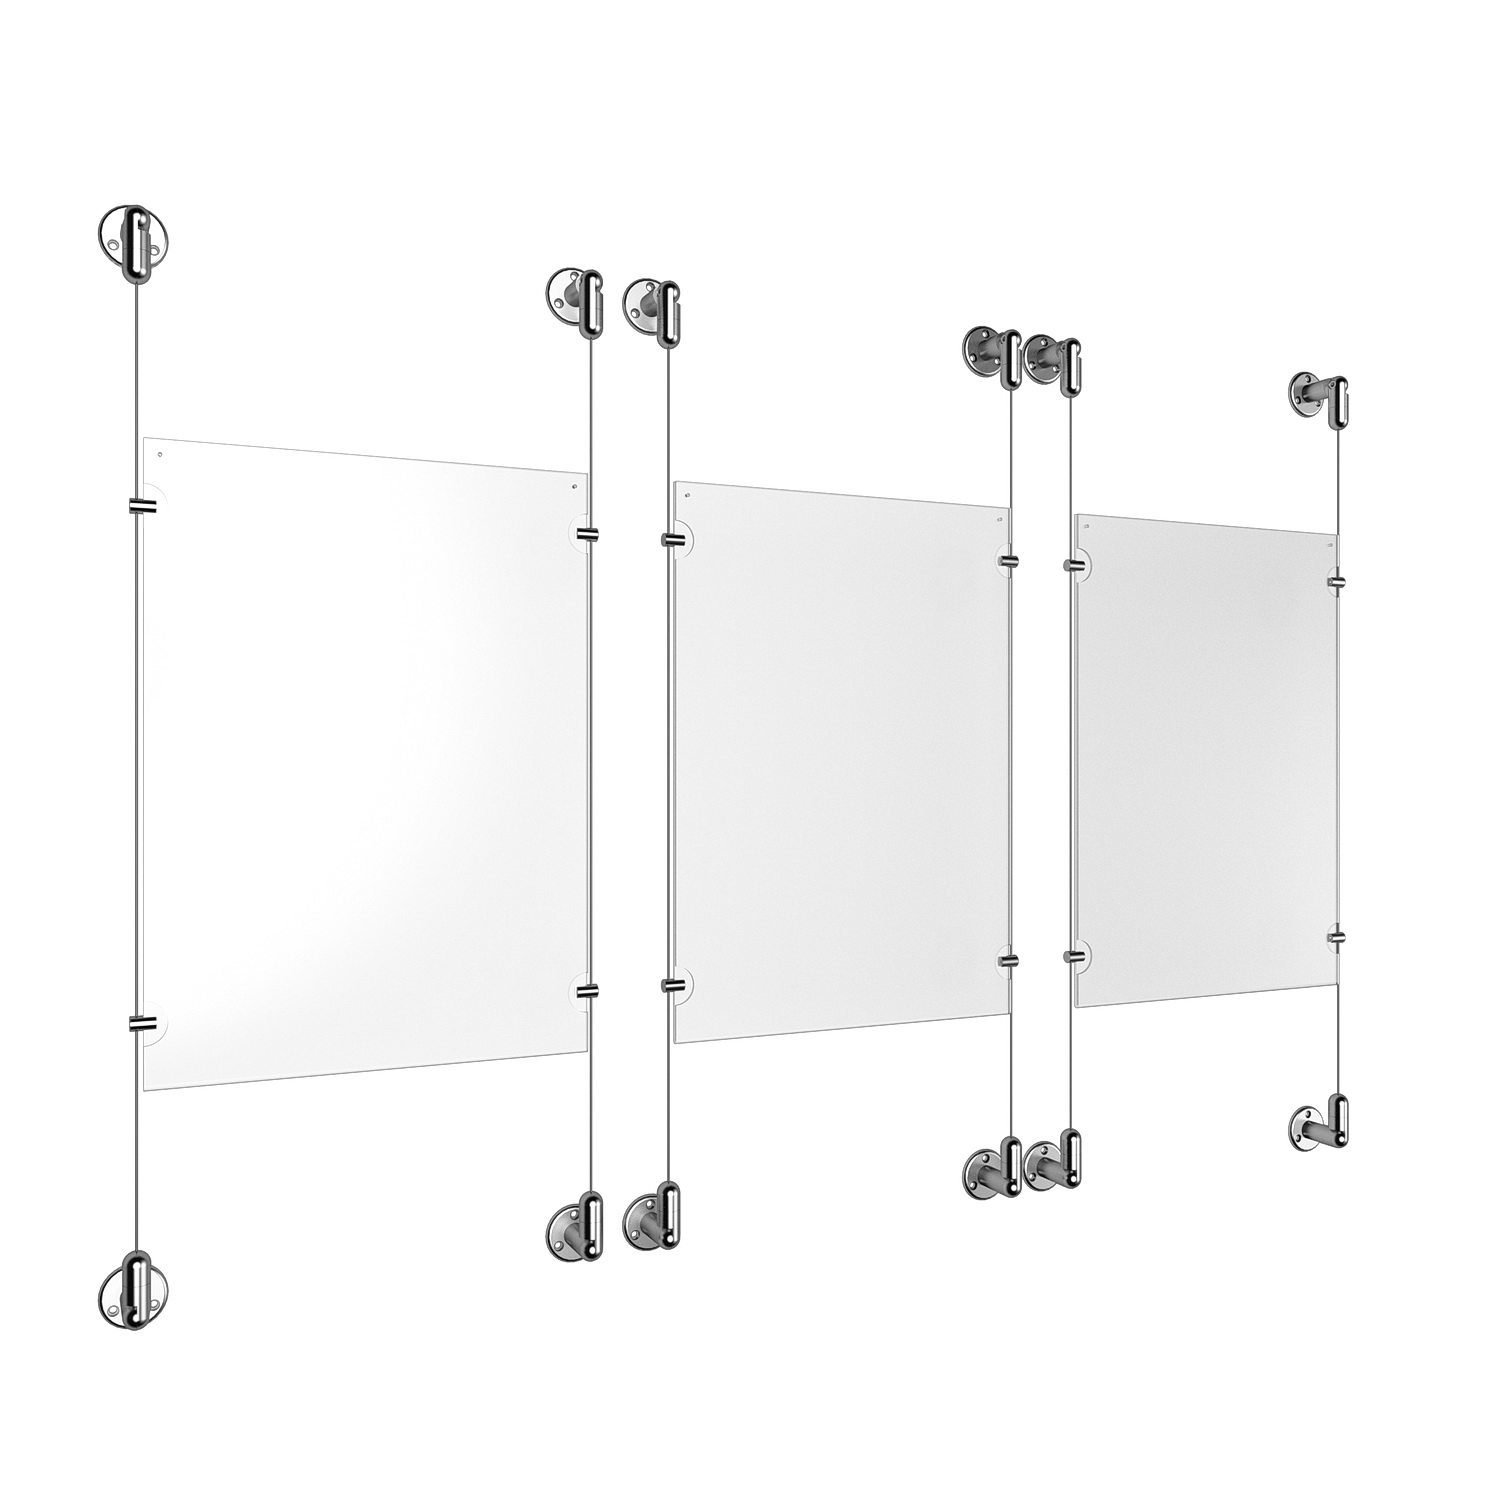 (3) 11'' Width x 17'' Height Clear Acrylic Frame & (6) Aluminum Clear Anodized Adjustable Angle Cable Systems with (12) Single-Sided Panel Grippers